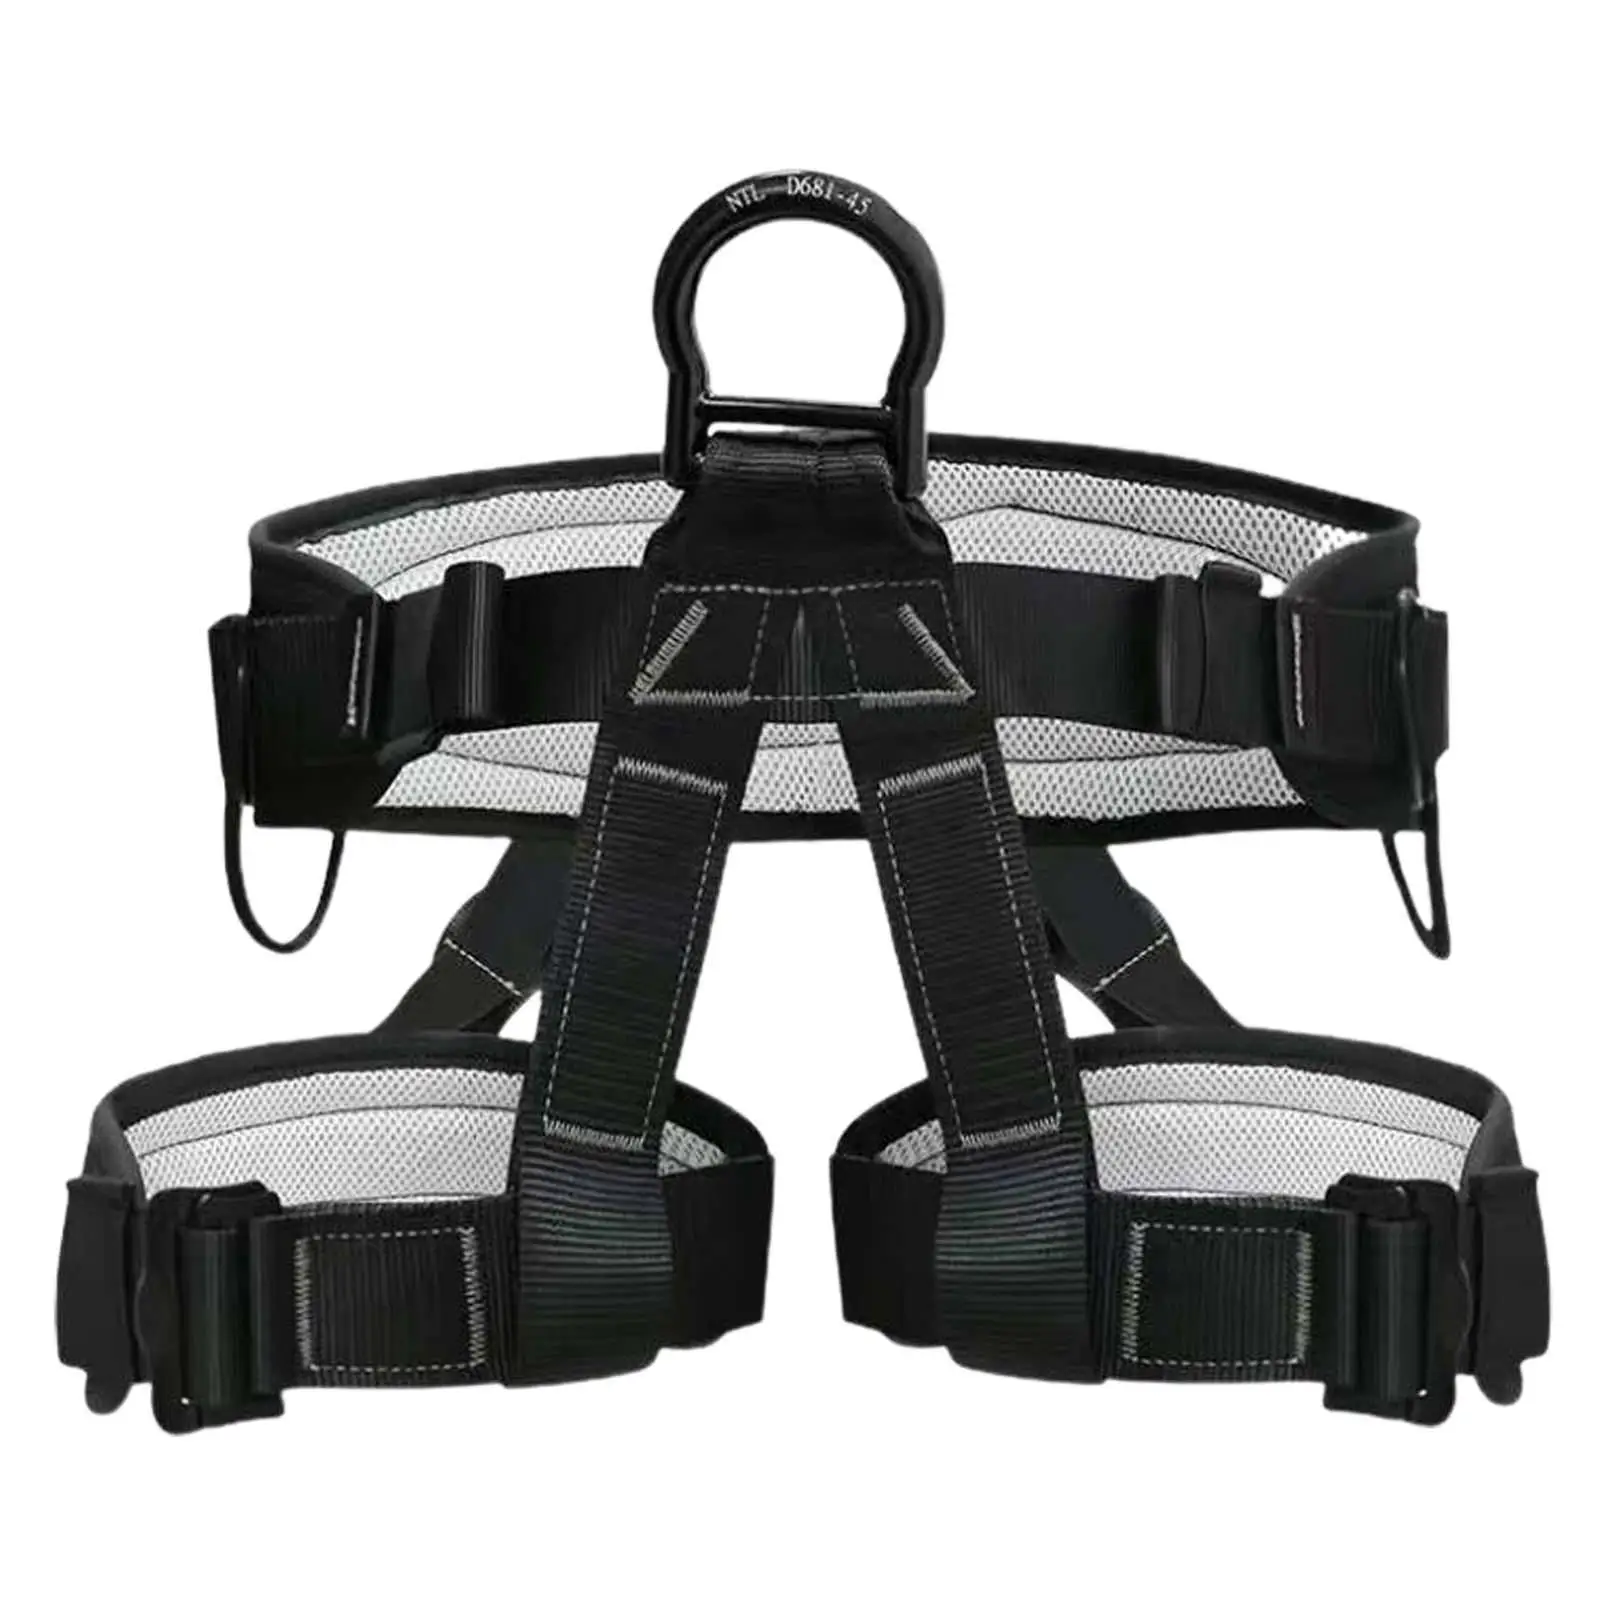 Outdoor Climbing Harness Half Body Harness for Mountaineering Expanding Tree Arborist Climbing Rappelling